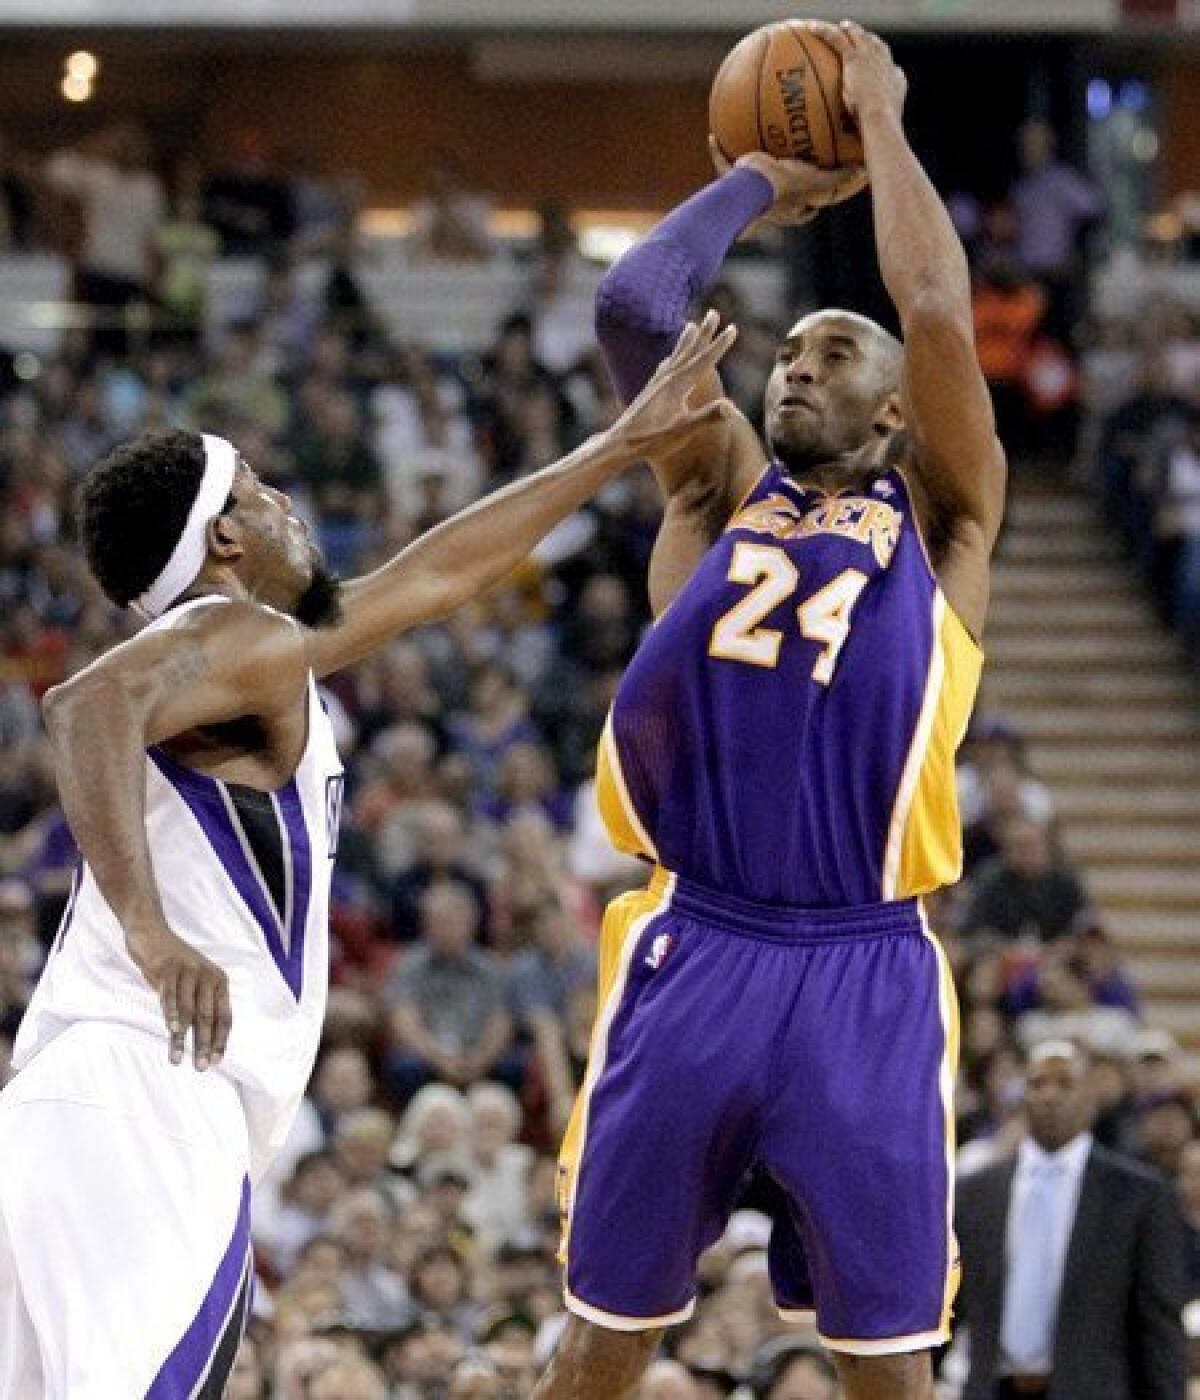 Lakers guard Kobe Bryant pulls up for a jumper over Kings forward John Salmons in the first half Saturday night in Sacramento.